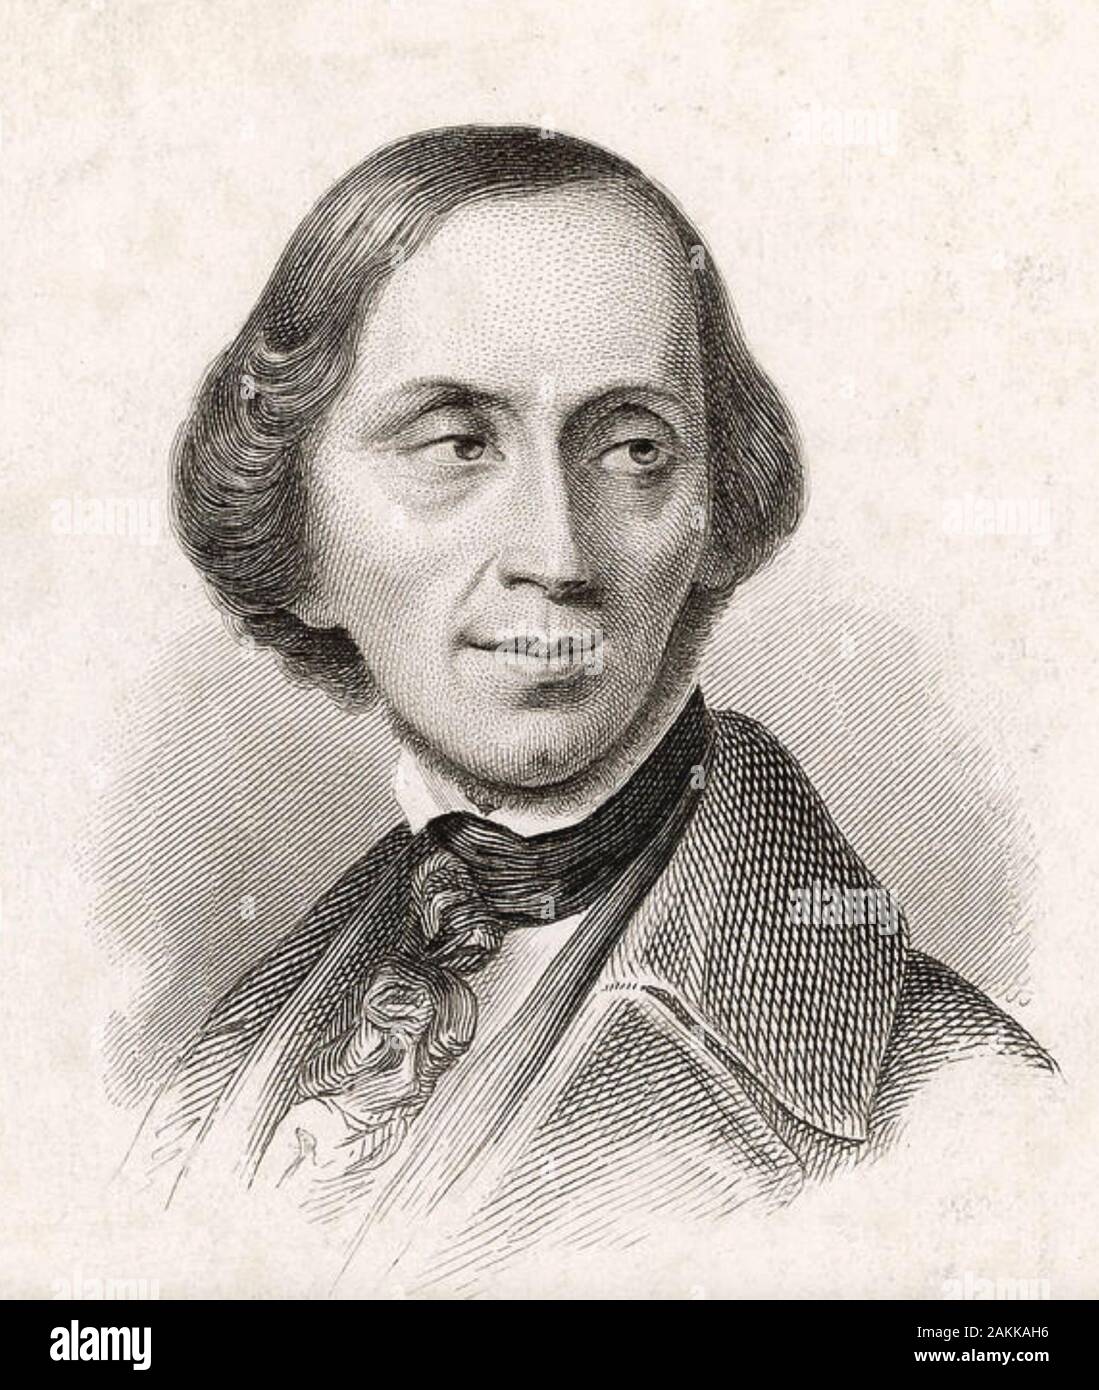 HANS CHRISTIAN ANDERSON (1805-1875) Danish author about 1835 Stock Photo